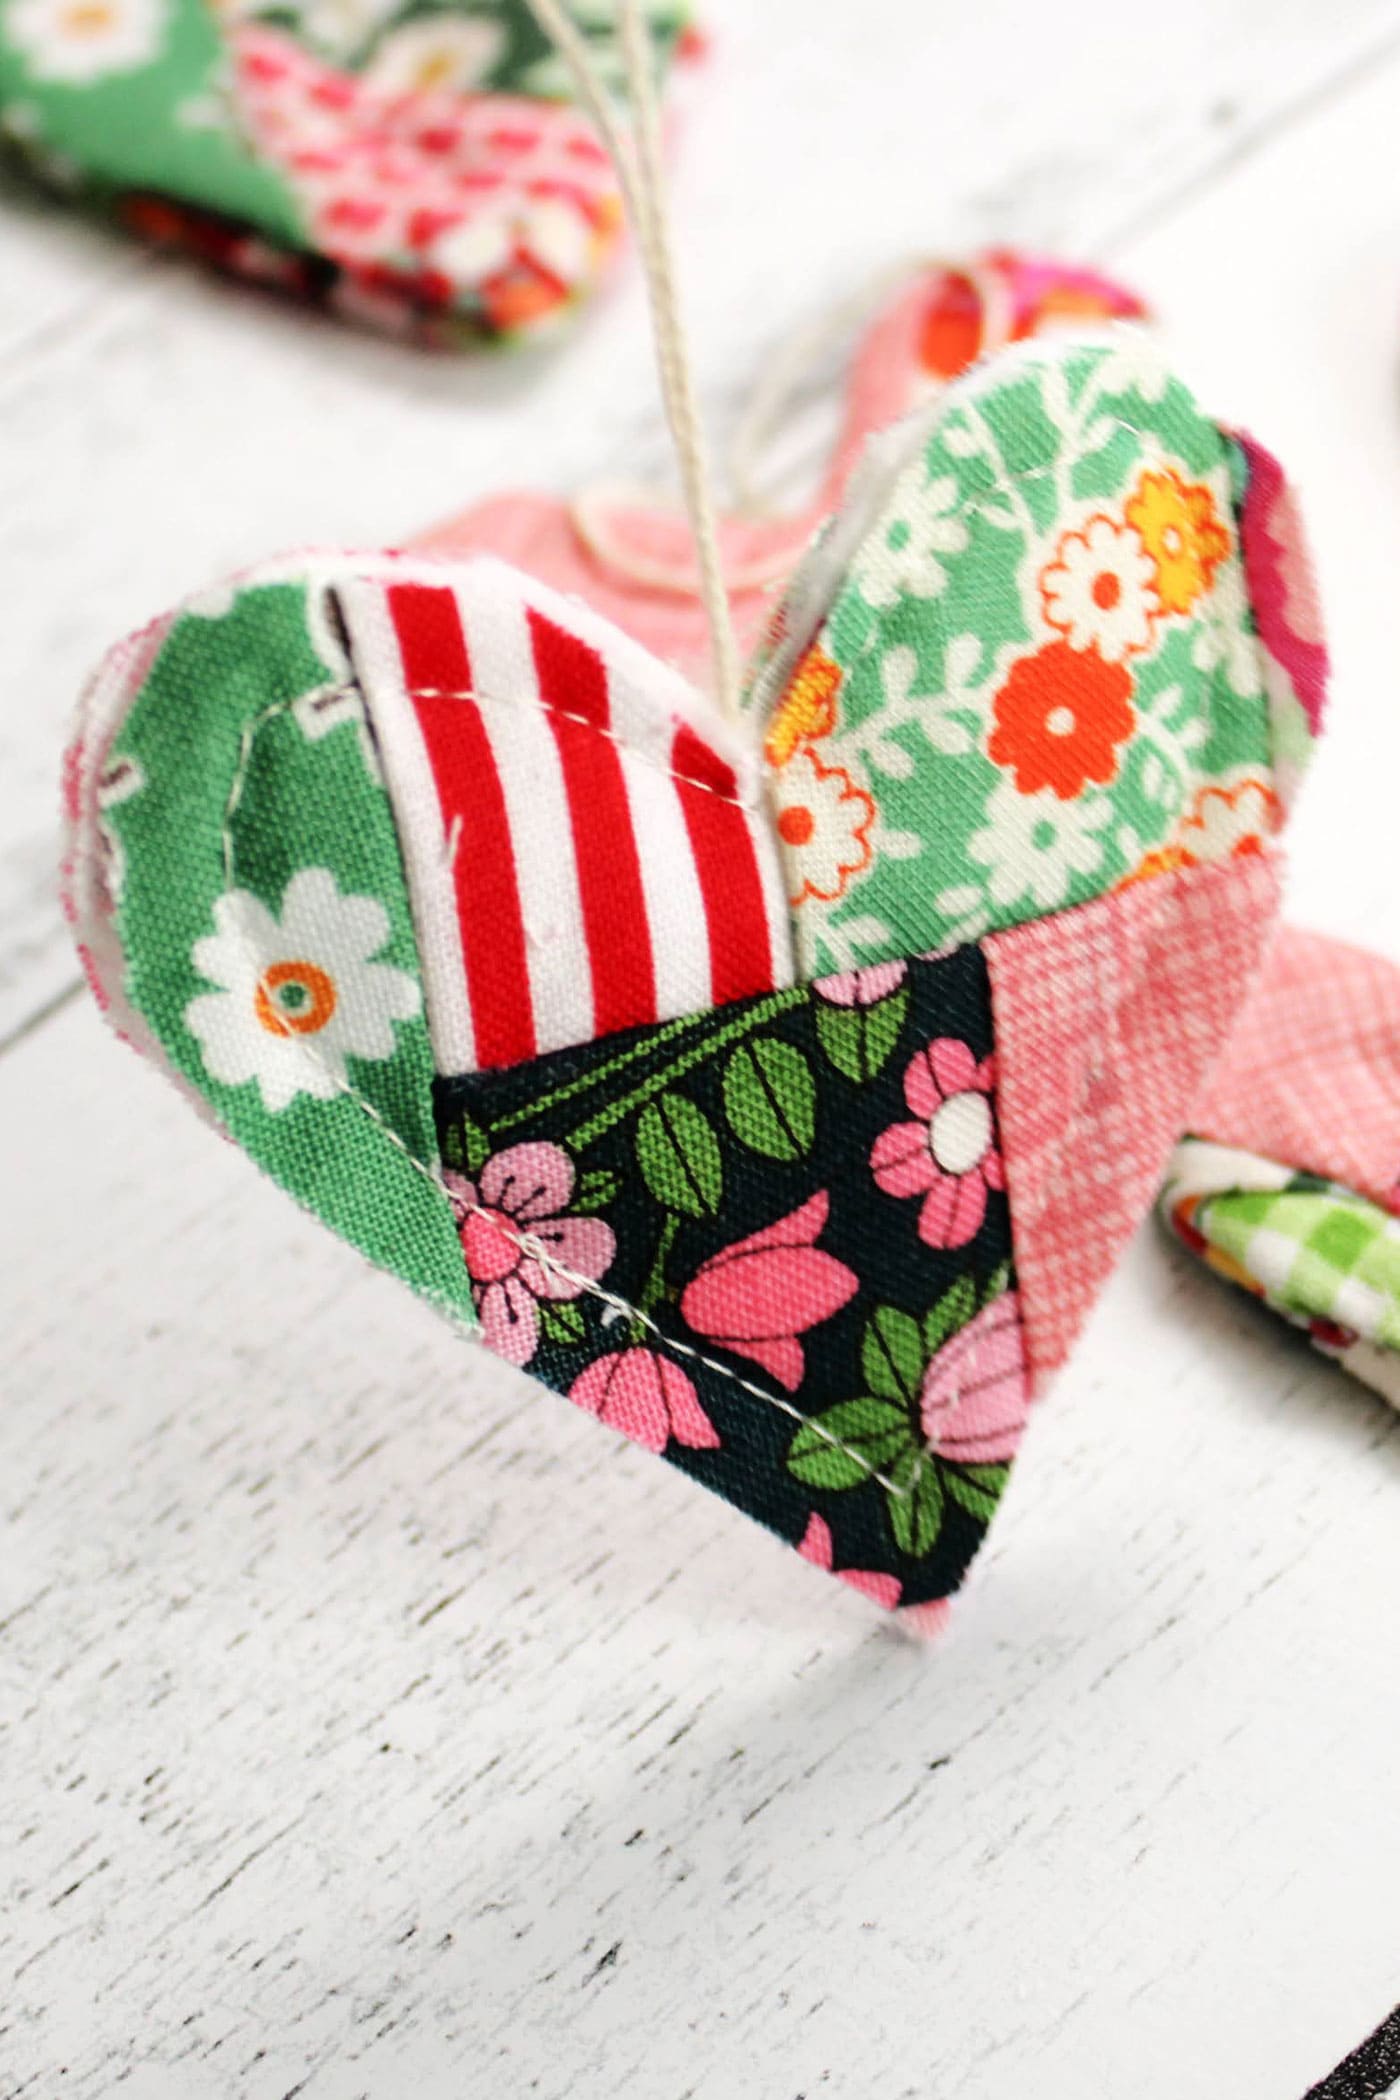 Improv Pieced Patchwork Heart Ornaments